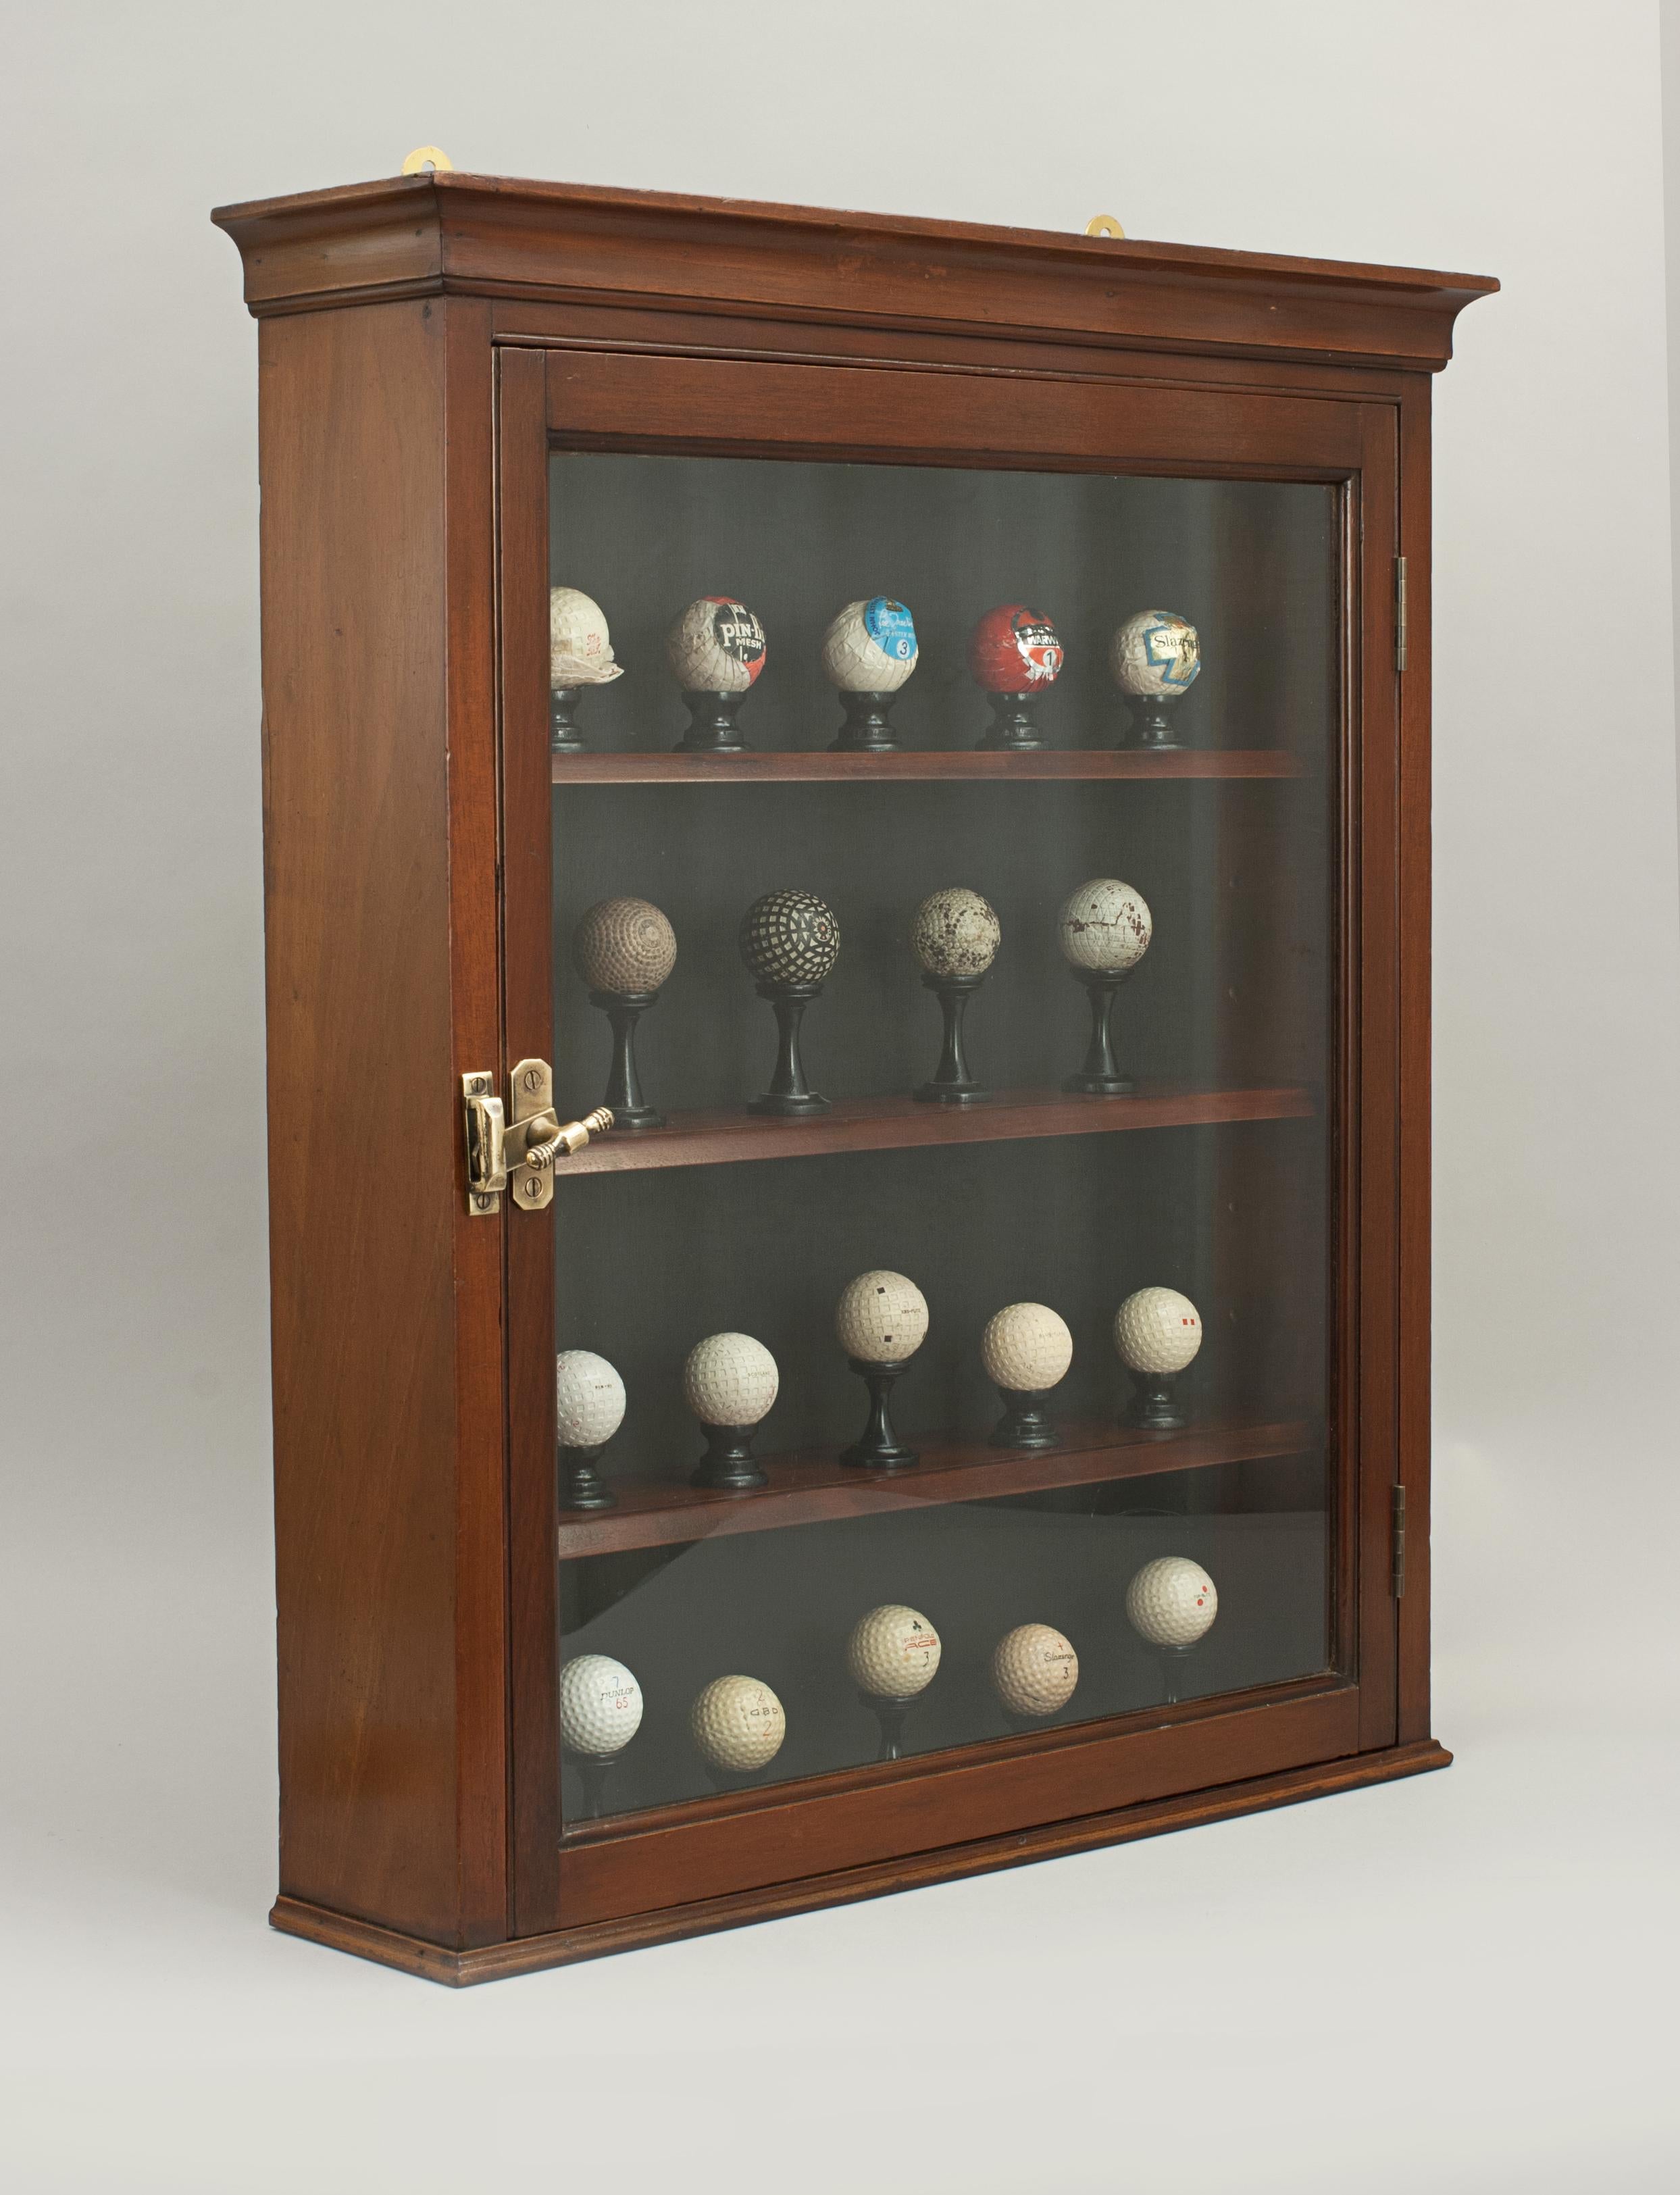 Antique mahogany golf ball display cabinet.
A Victorian wall display cabinet with a display of 19 golf balls. The cabinet is with a single glazed door and a black background. The balls sit on individually turned ebonized wooden display stands. The